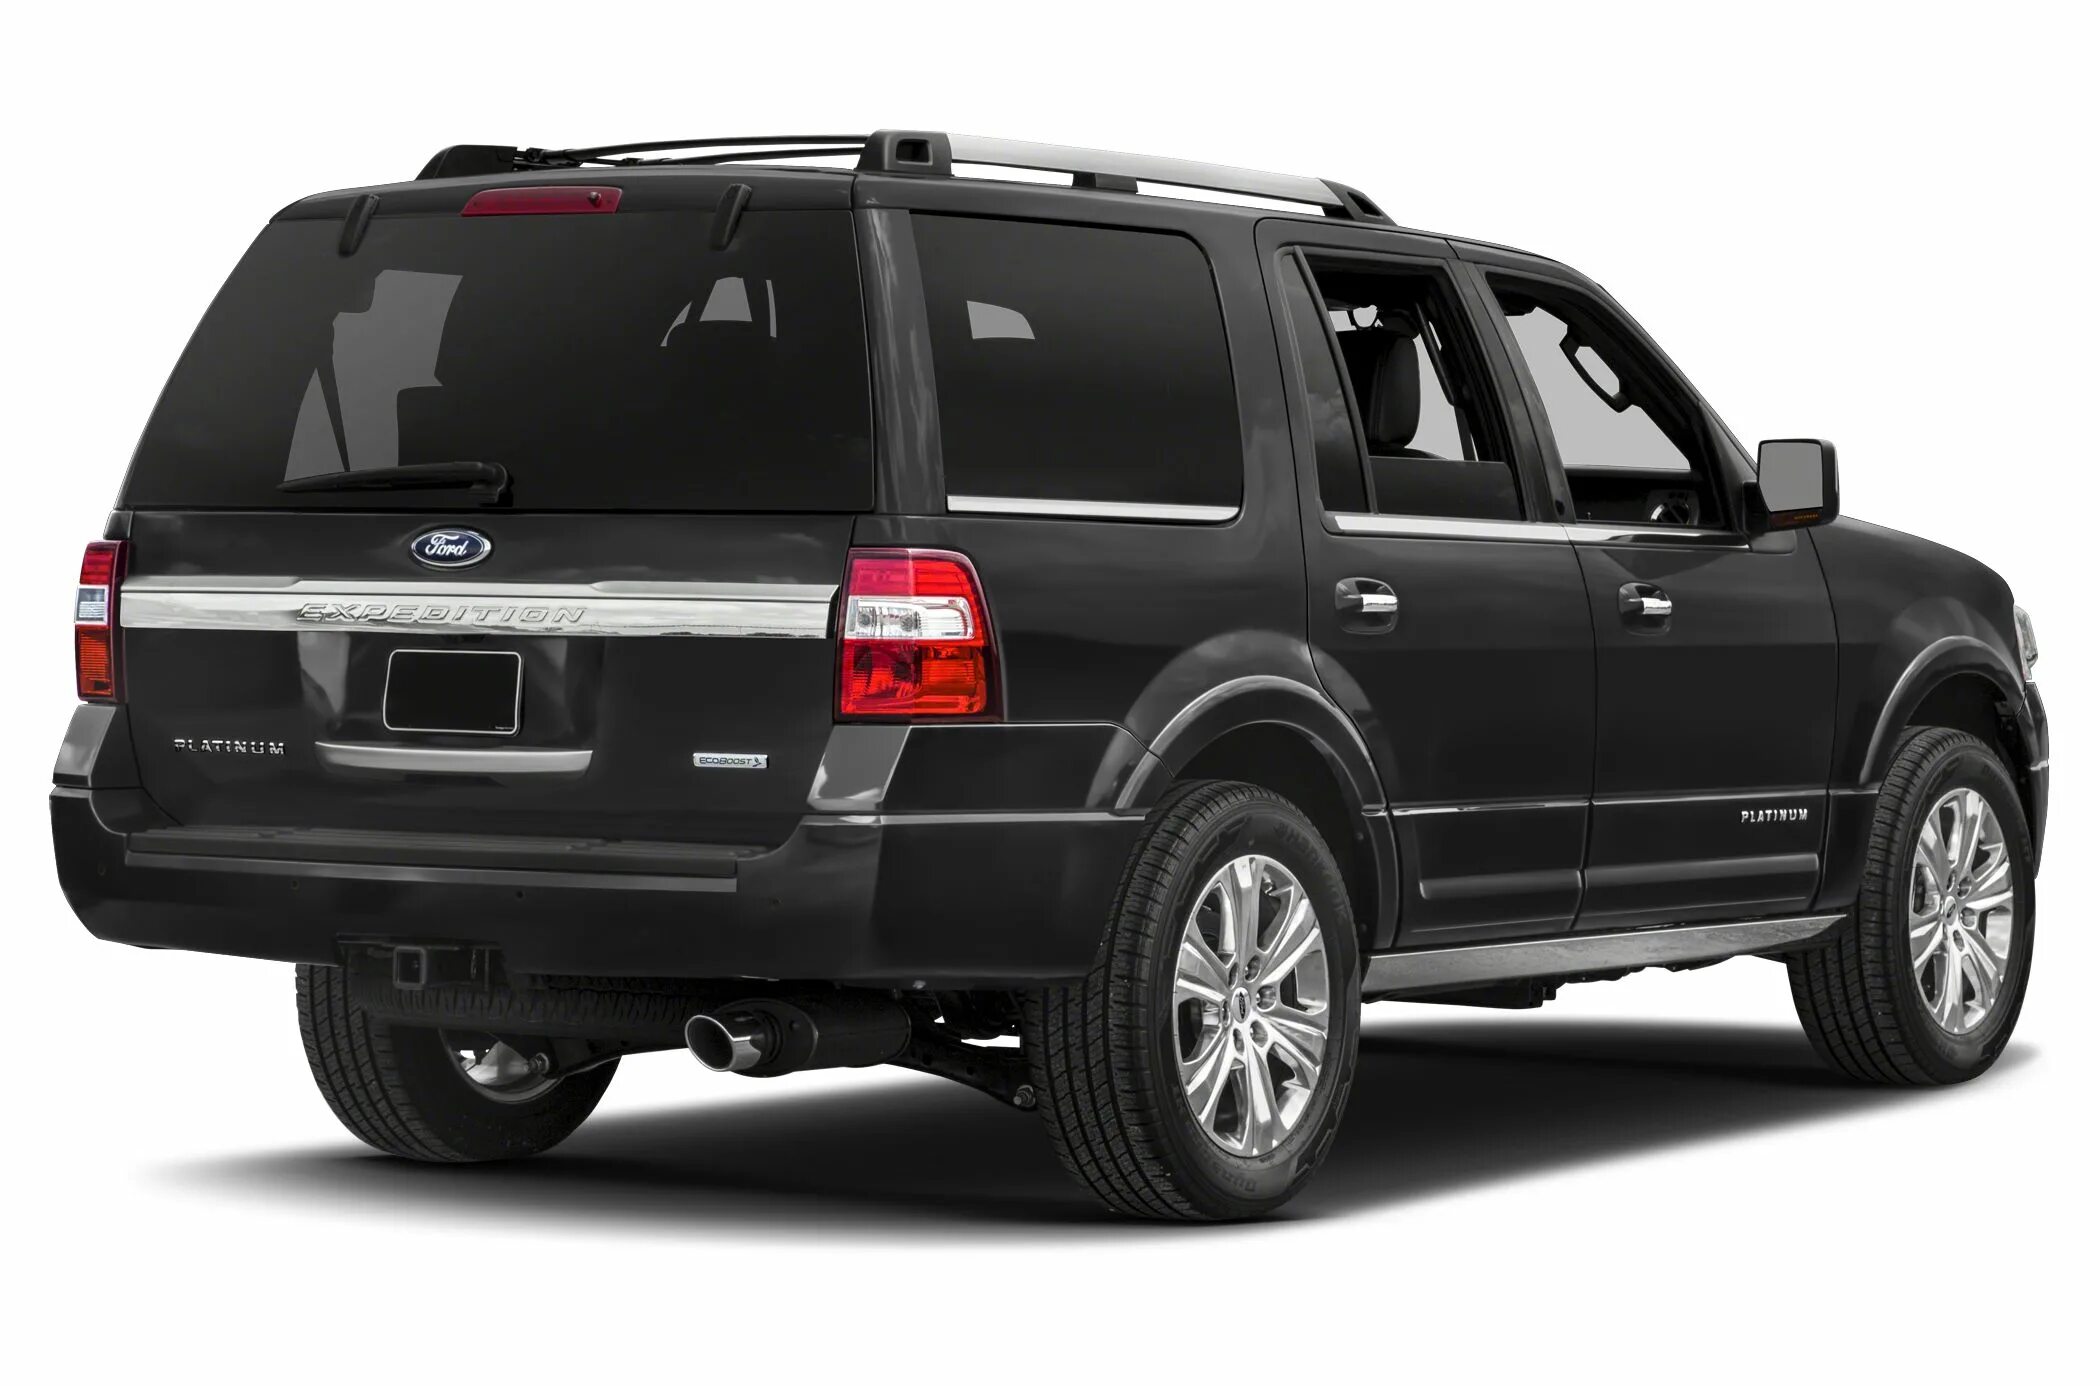 Ford Expedition 2014-2017. Ford Expedition Predator. Ford Expedition 2014. Хонда Экспедишн.